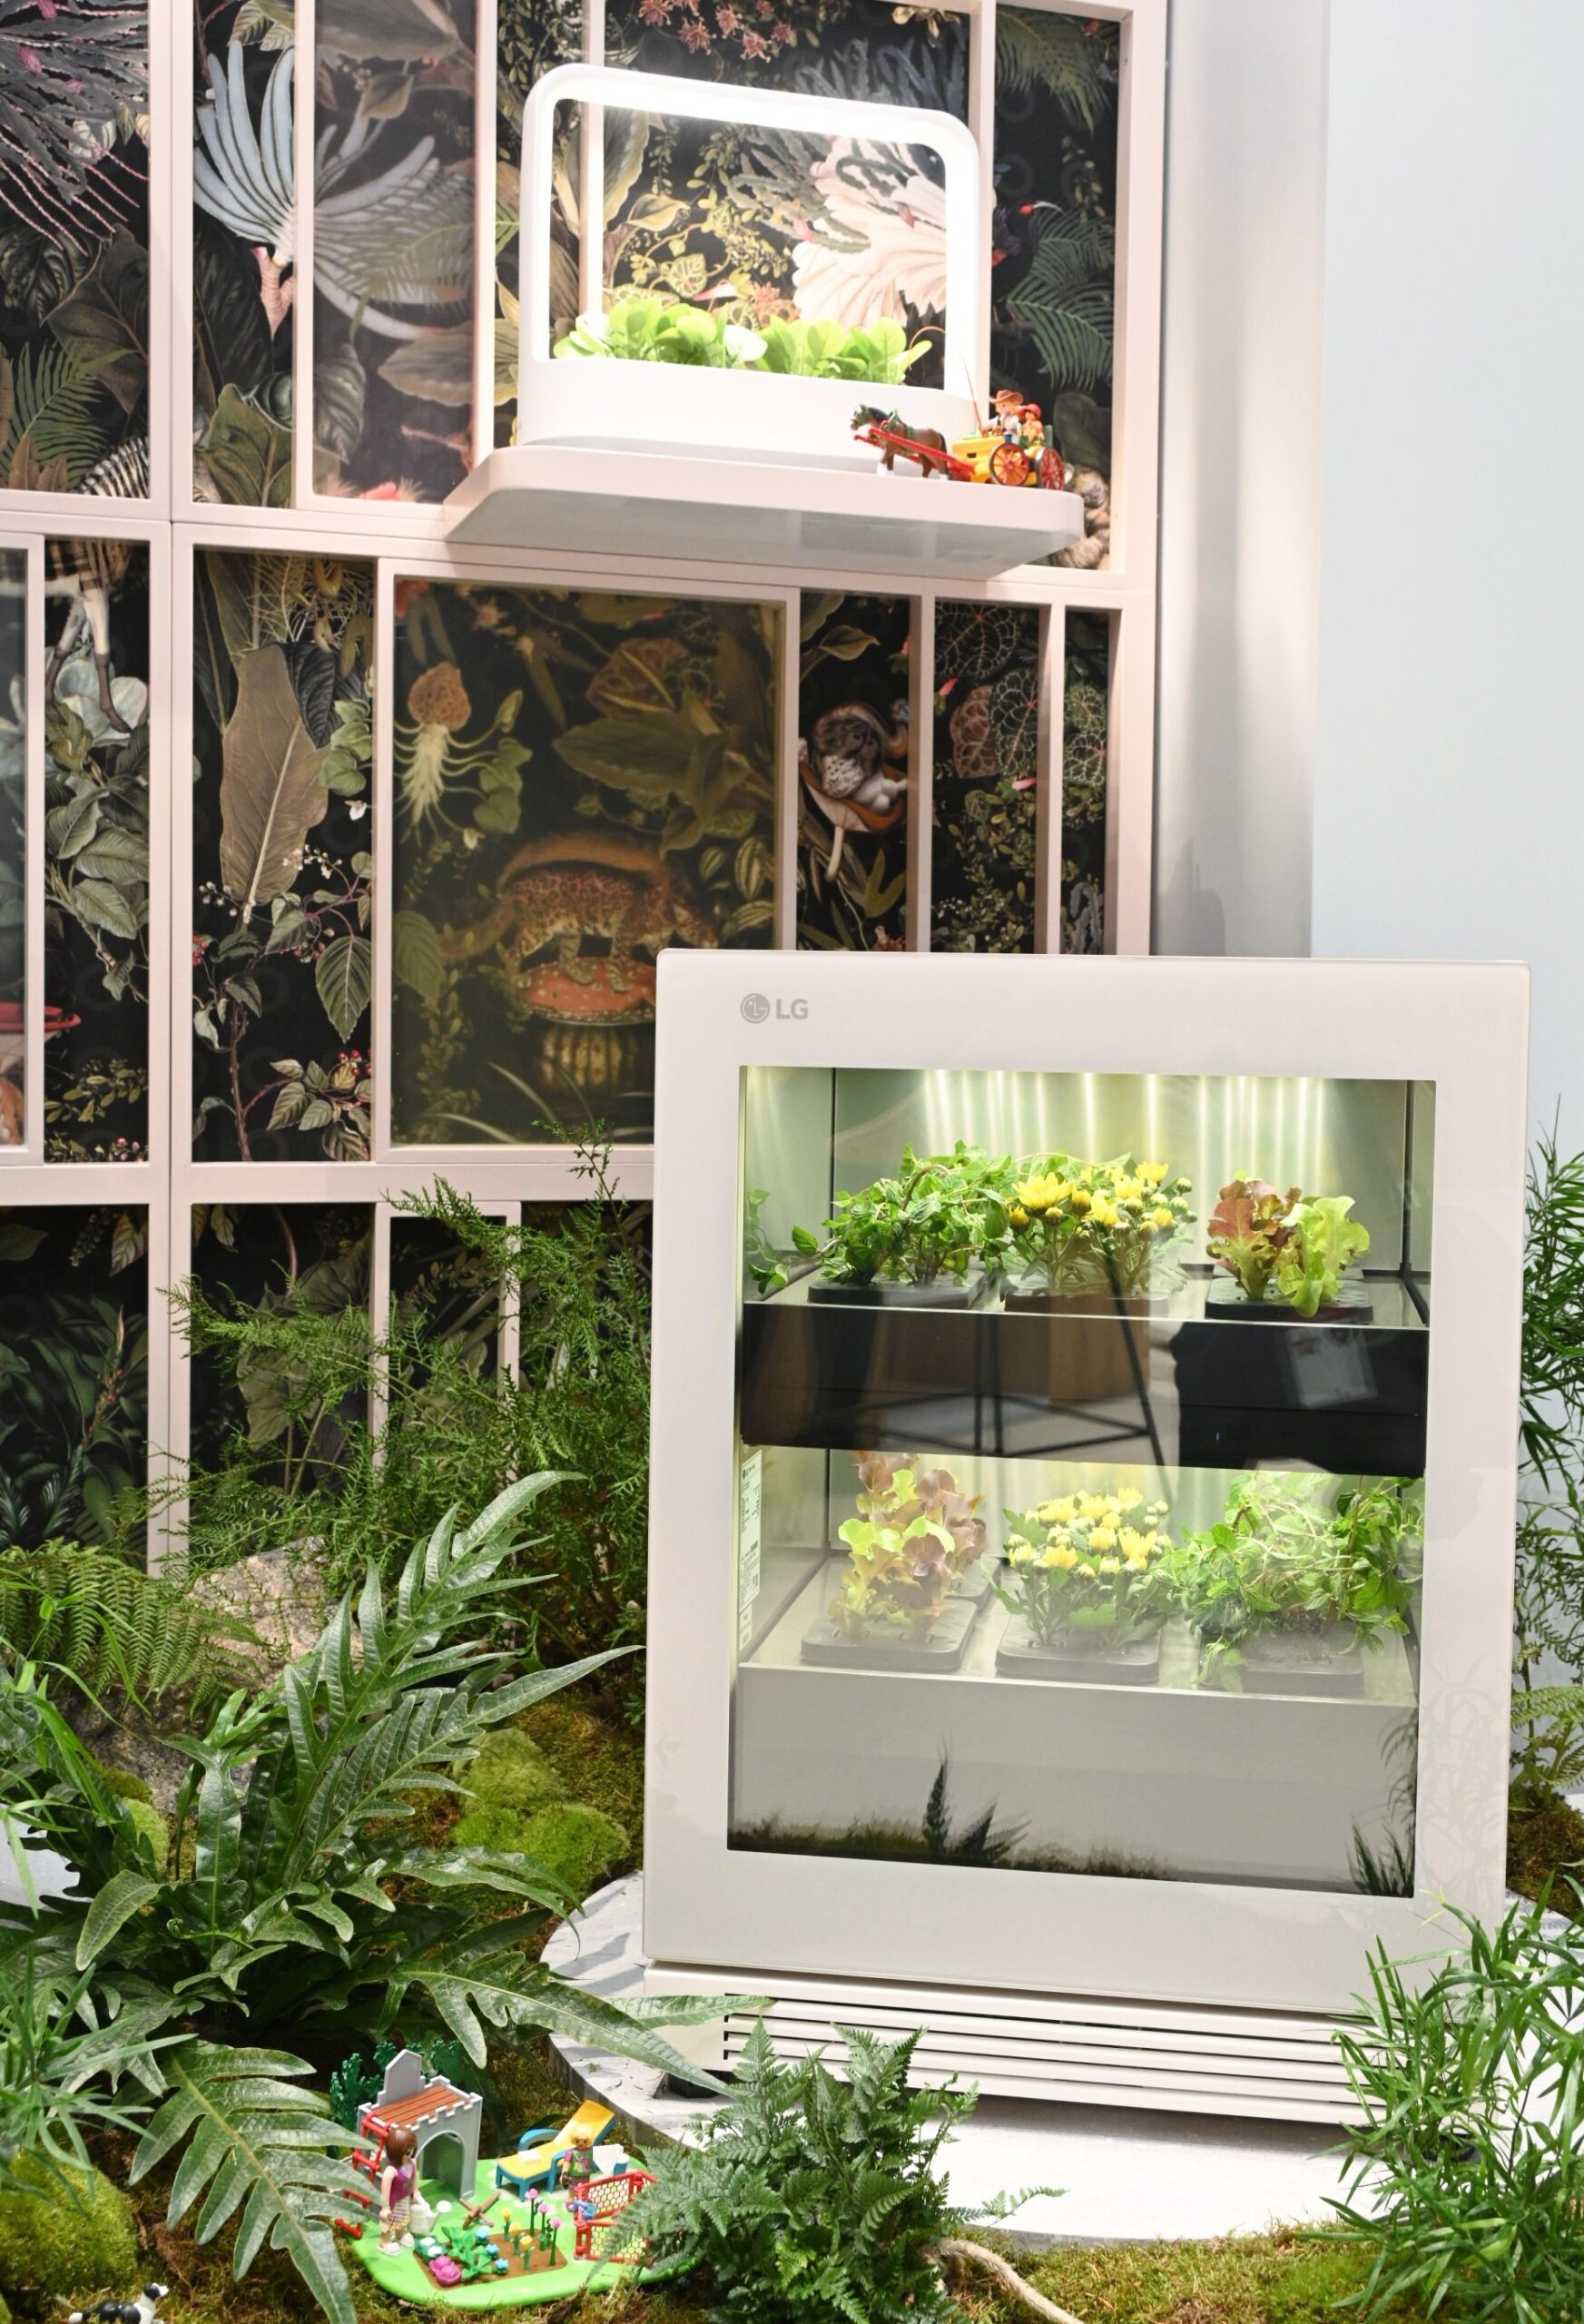 LG tiiun and tiiun mini are placed on the floor and wall shelf respectively, growing plants